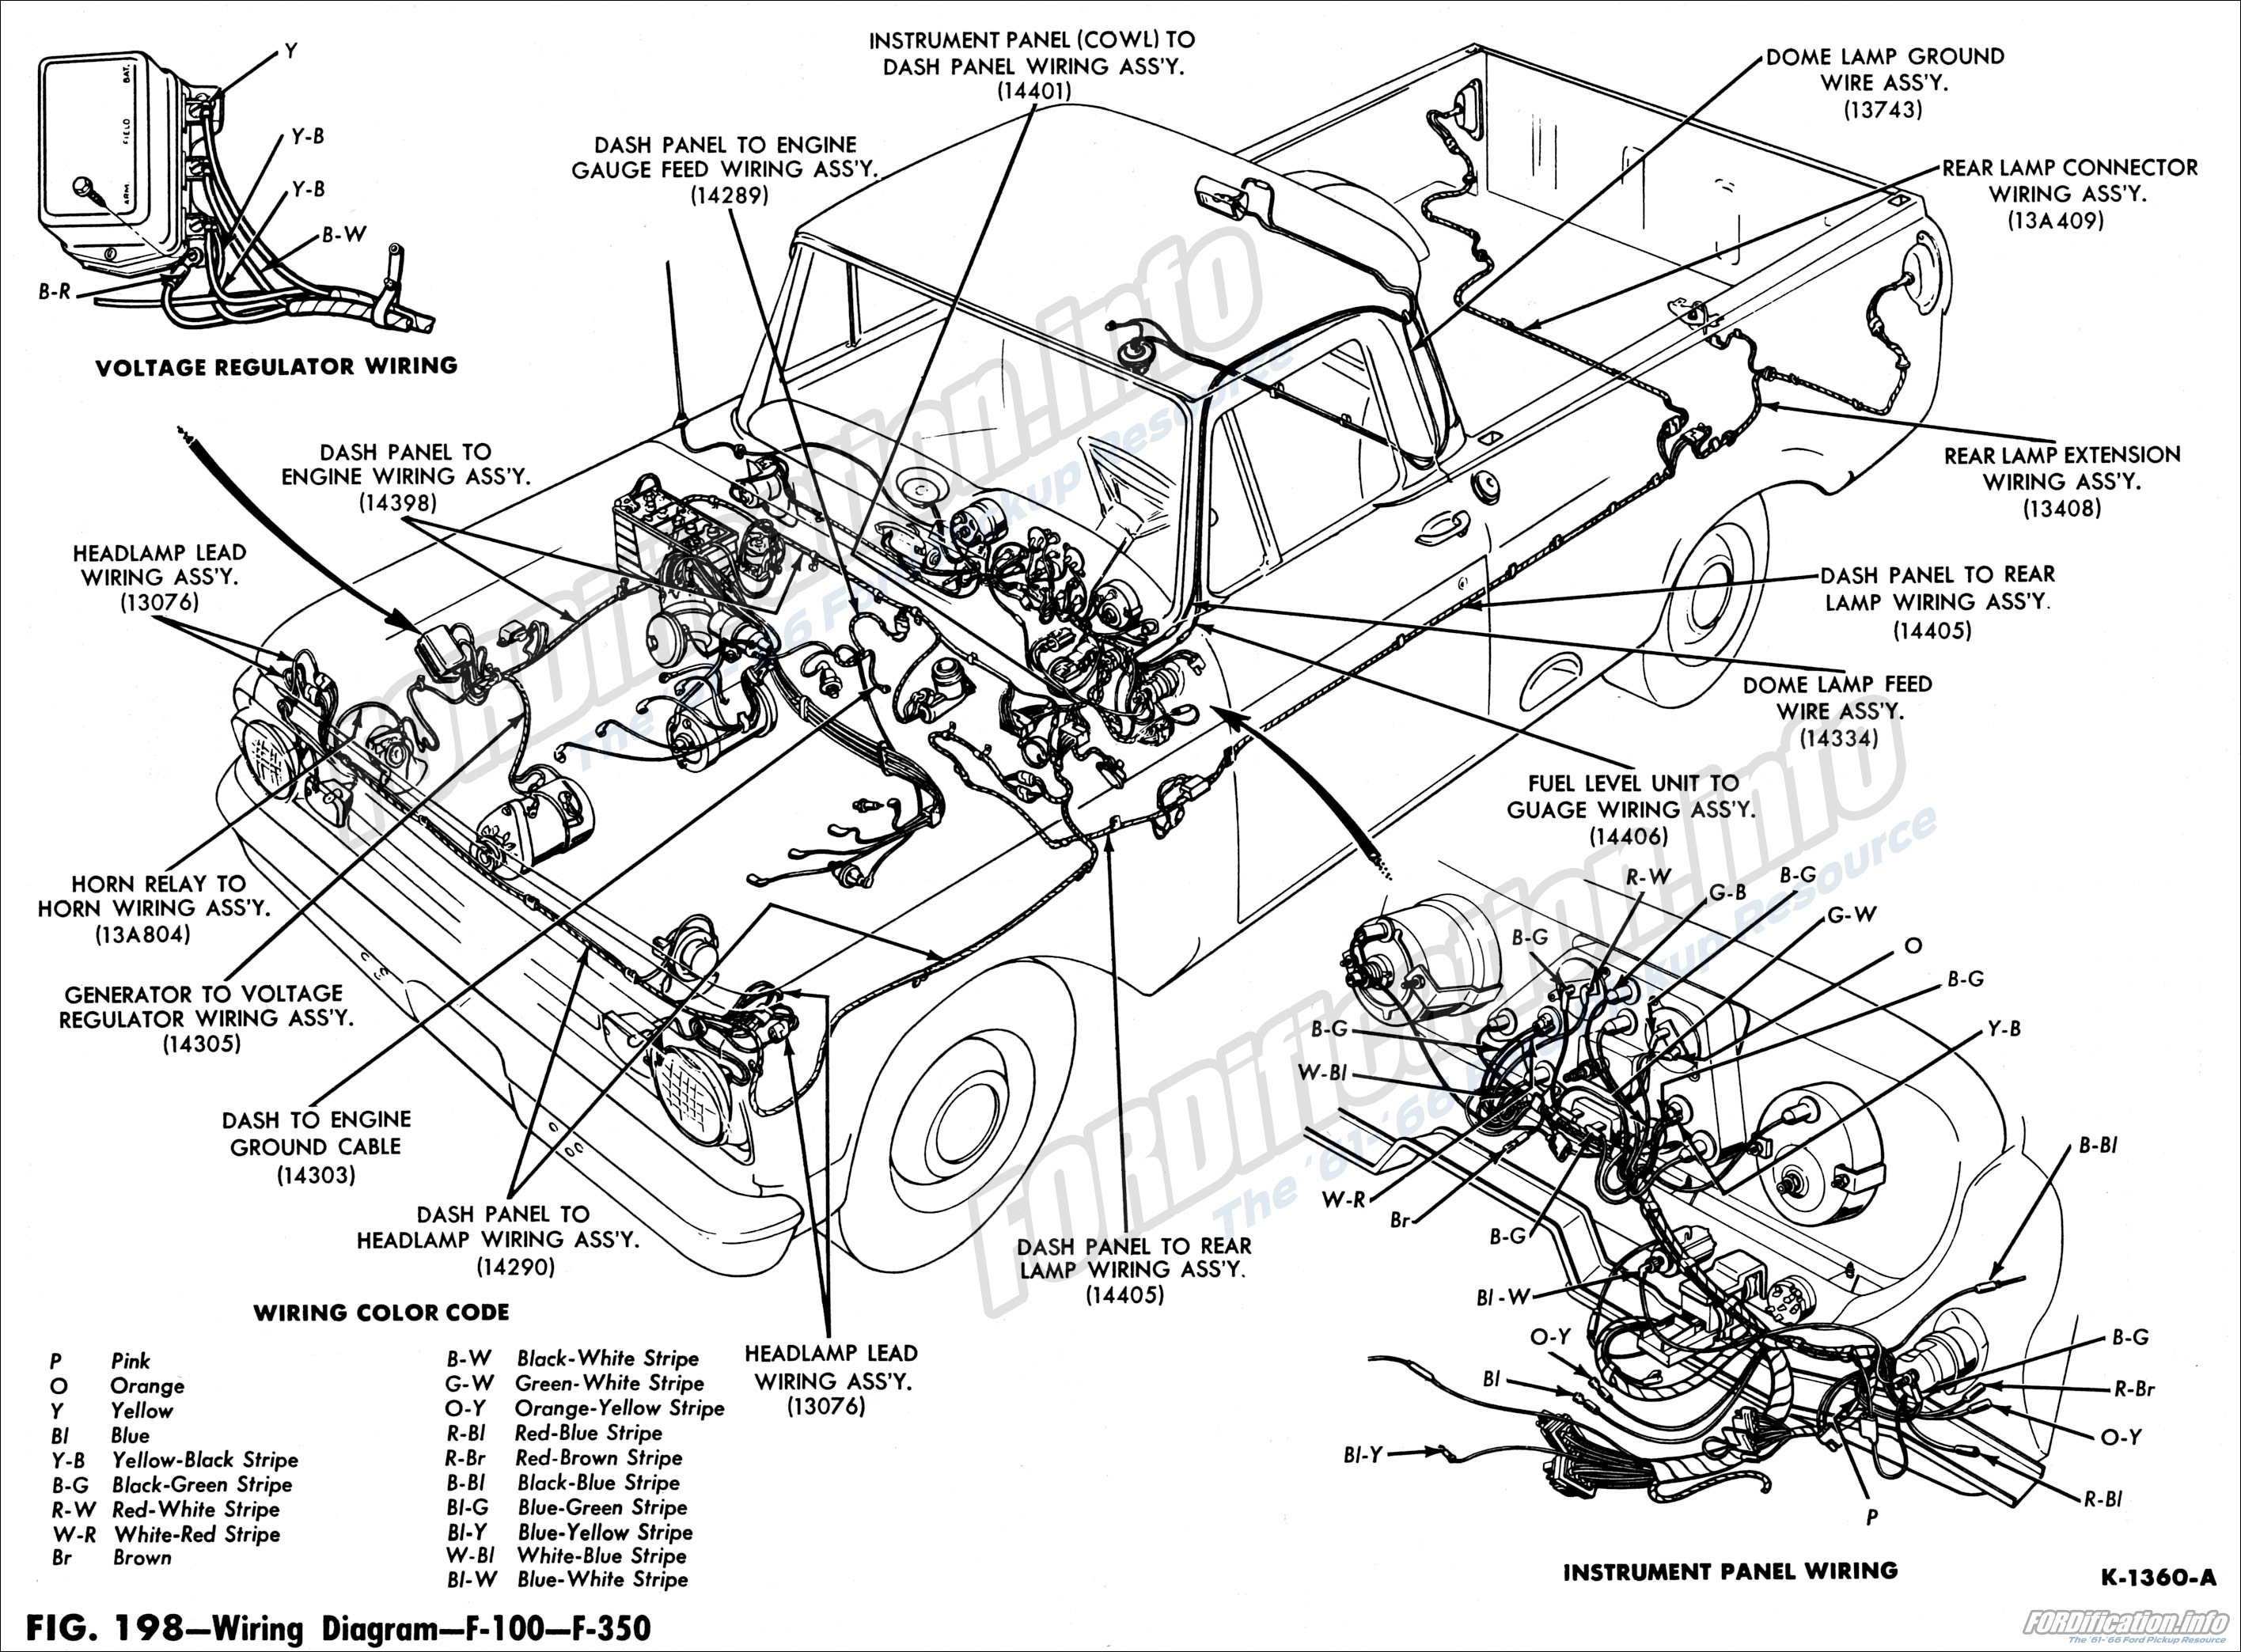 1963 Ford Truck Wiring Diagrams - FORDification.info - The '61-'66 Ford  Pickup Resource Wiring Diagram Transmission FORDification.info